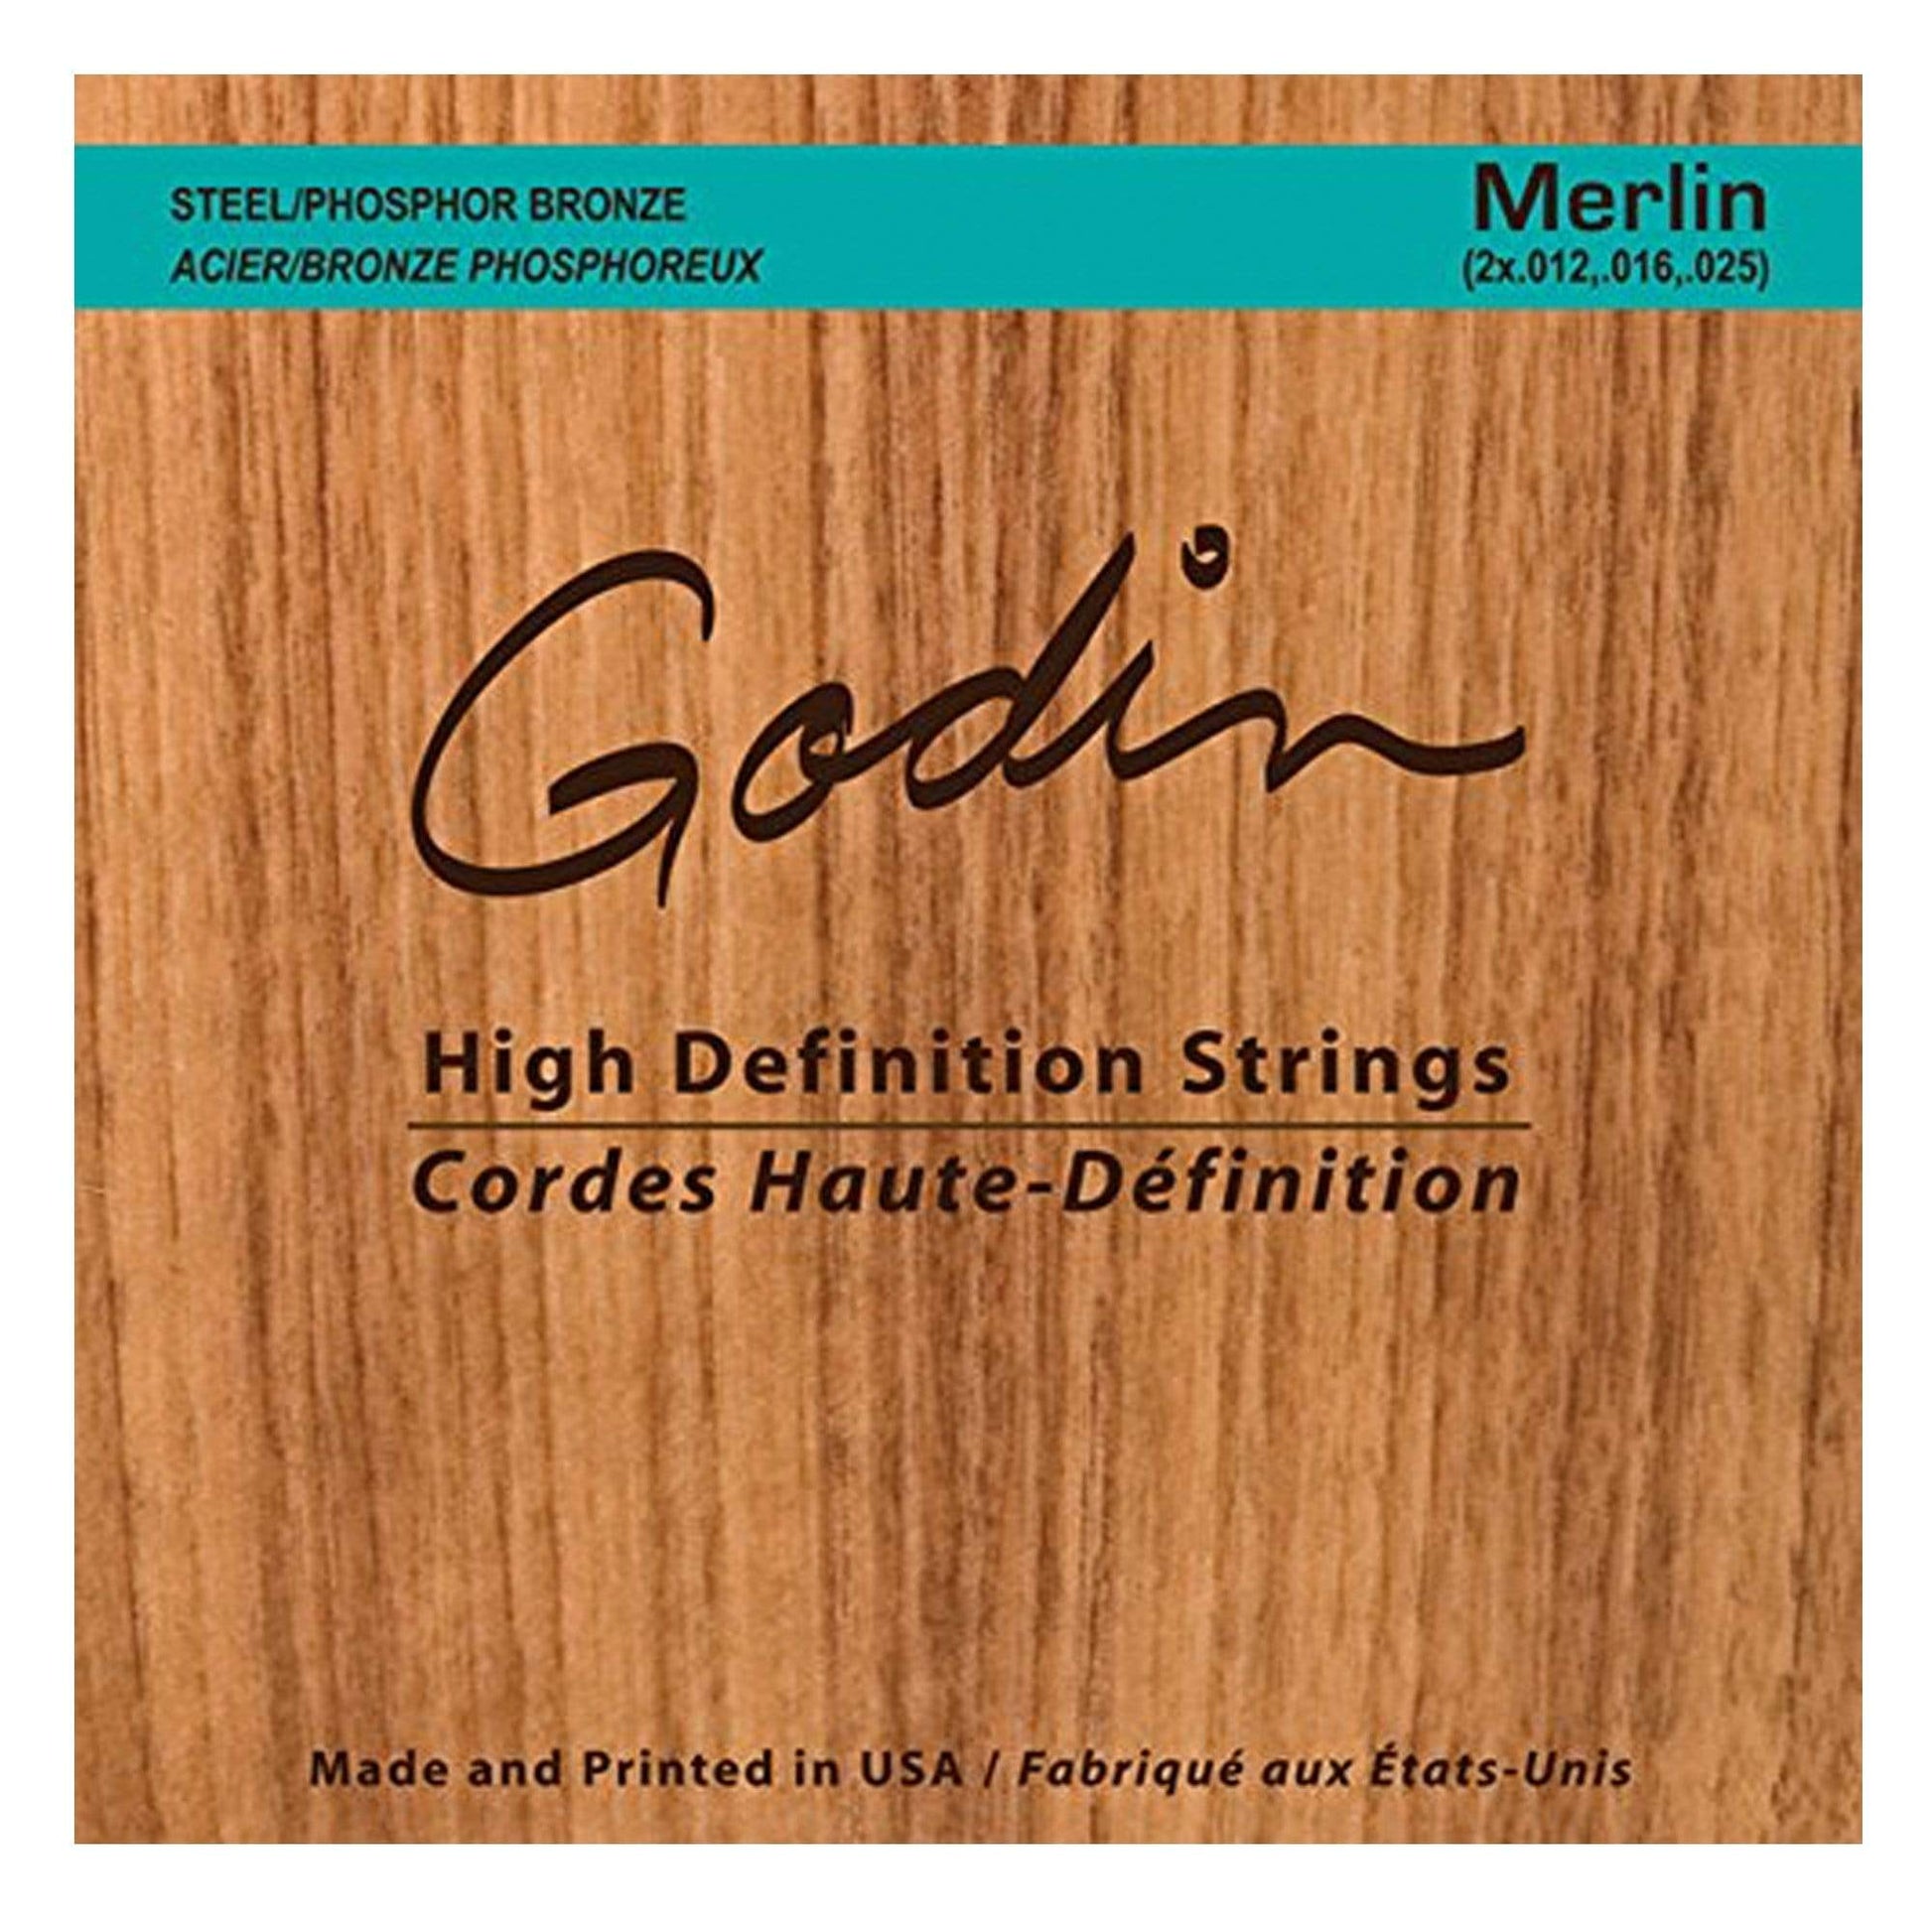 Seagull Merlin High-Definition Strings 12-25 (12 Pack Bundle) Accessories / Strings / Other Strings